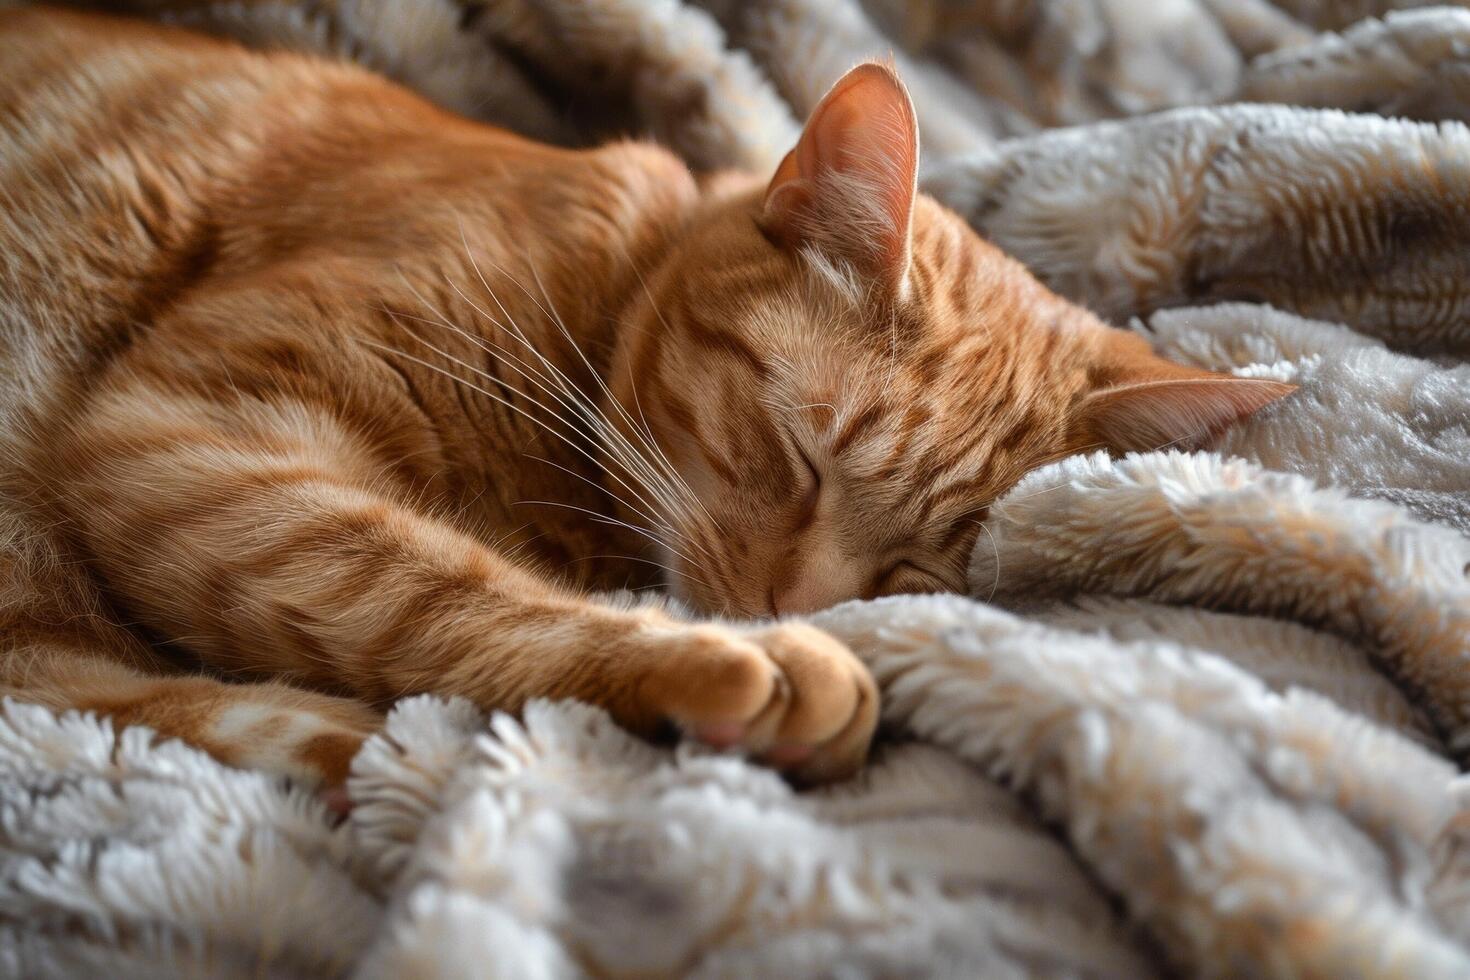 A contented ginger cat curled up on a cozy blanket, its eyes drooping with sleepy contentment photo